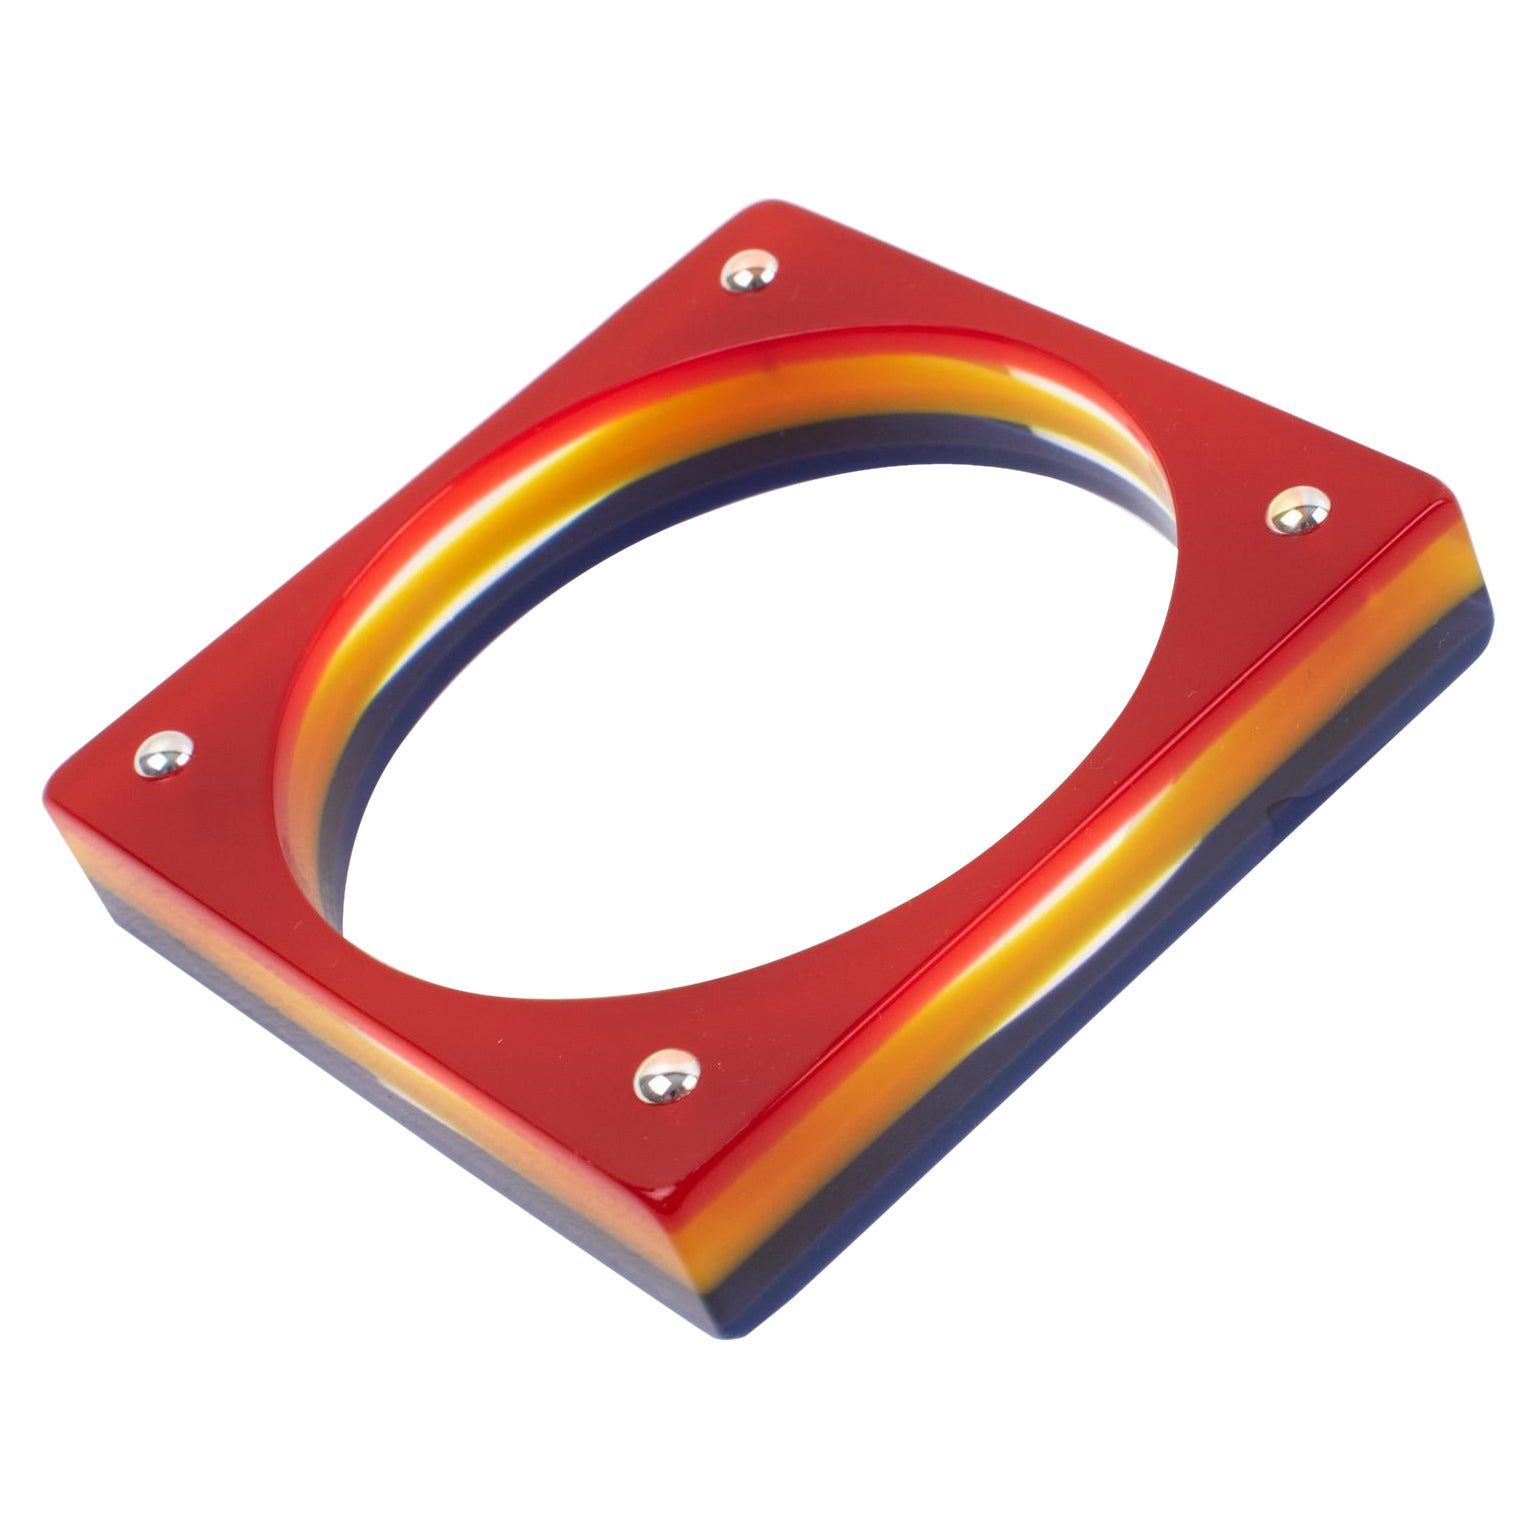 Karl Lagerfeld Red, Yellow and Blue Resin Square Bracelet For Sale